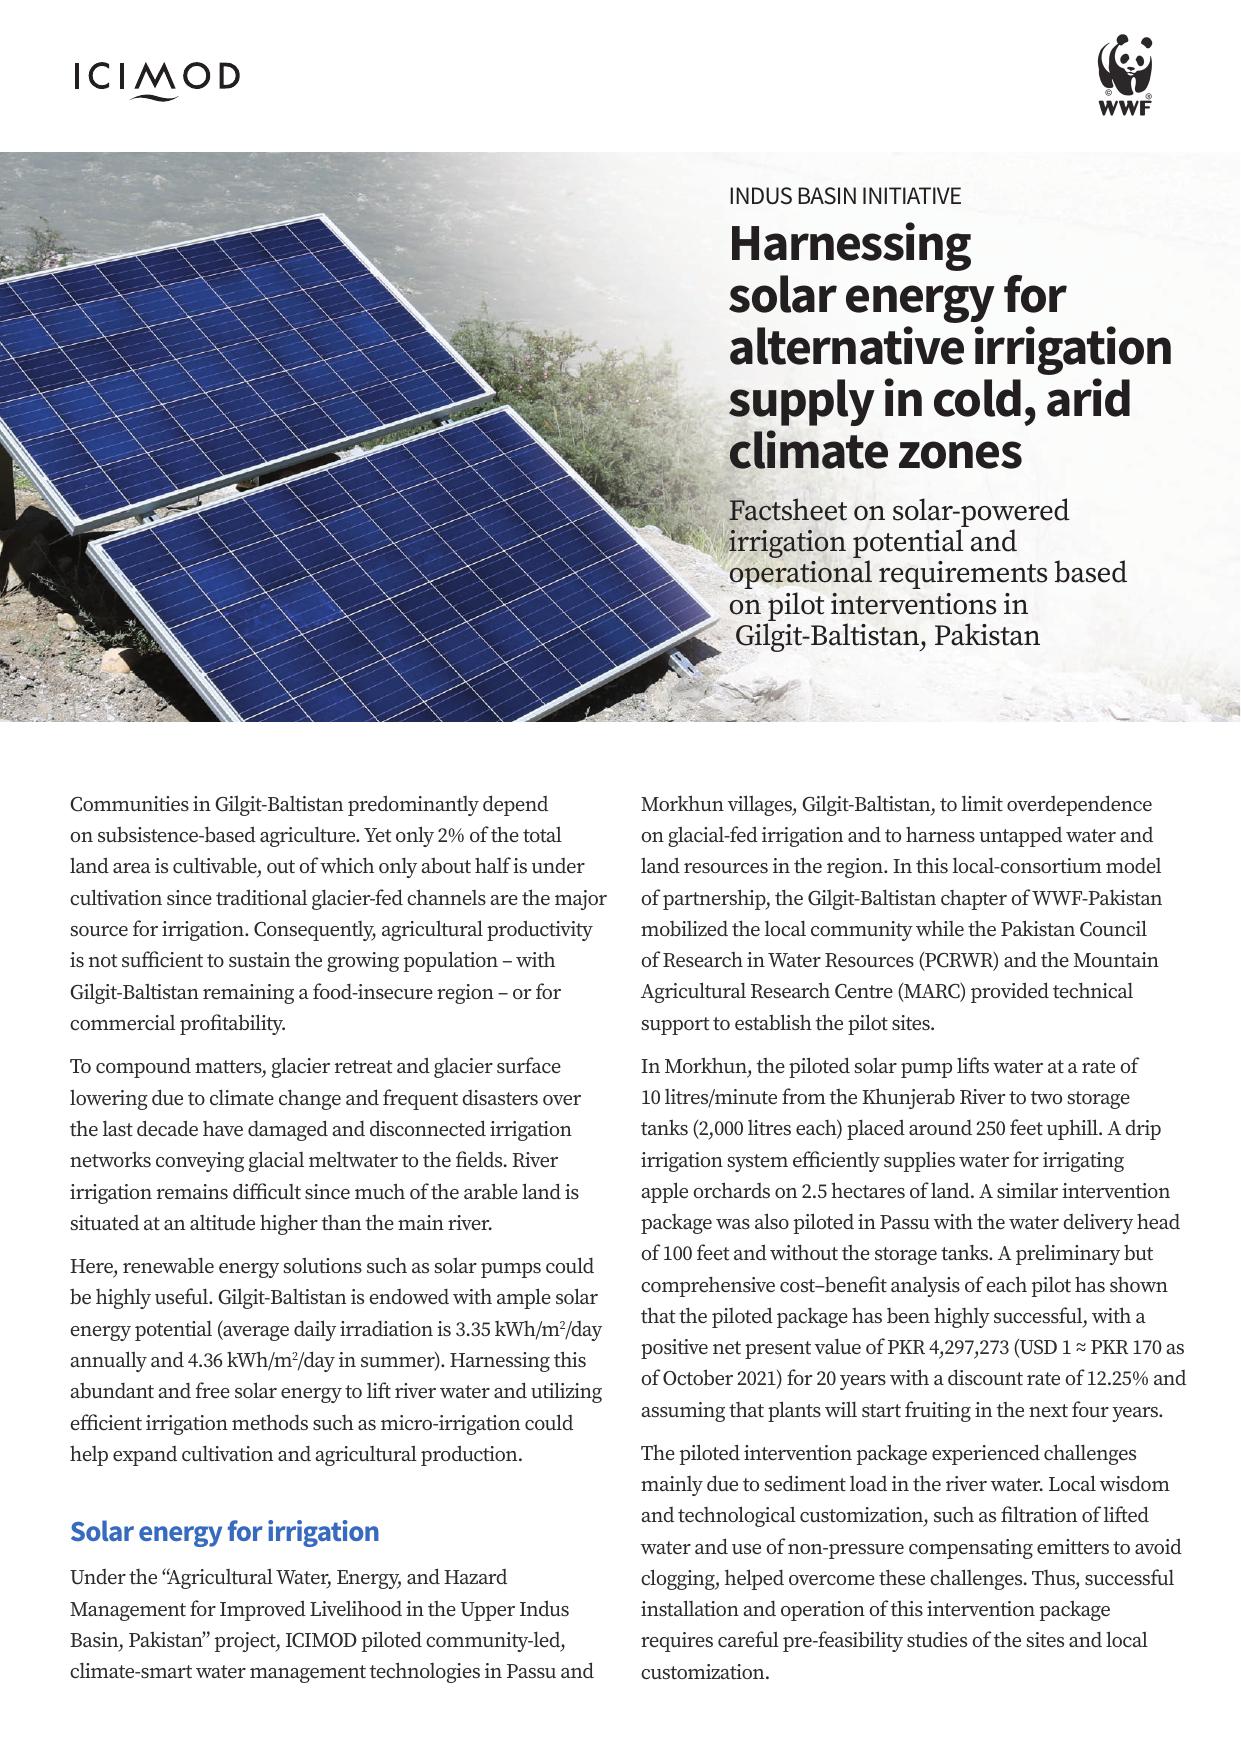 Harnessing solar energy for alternative irrigation supply in cold, arid climate zones